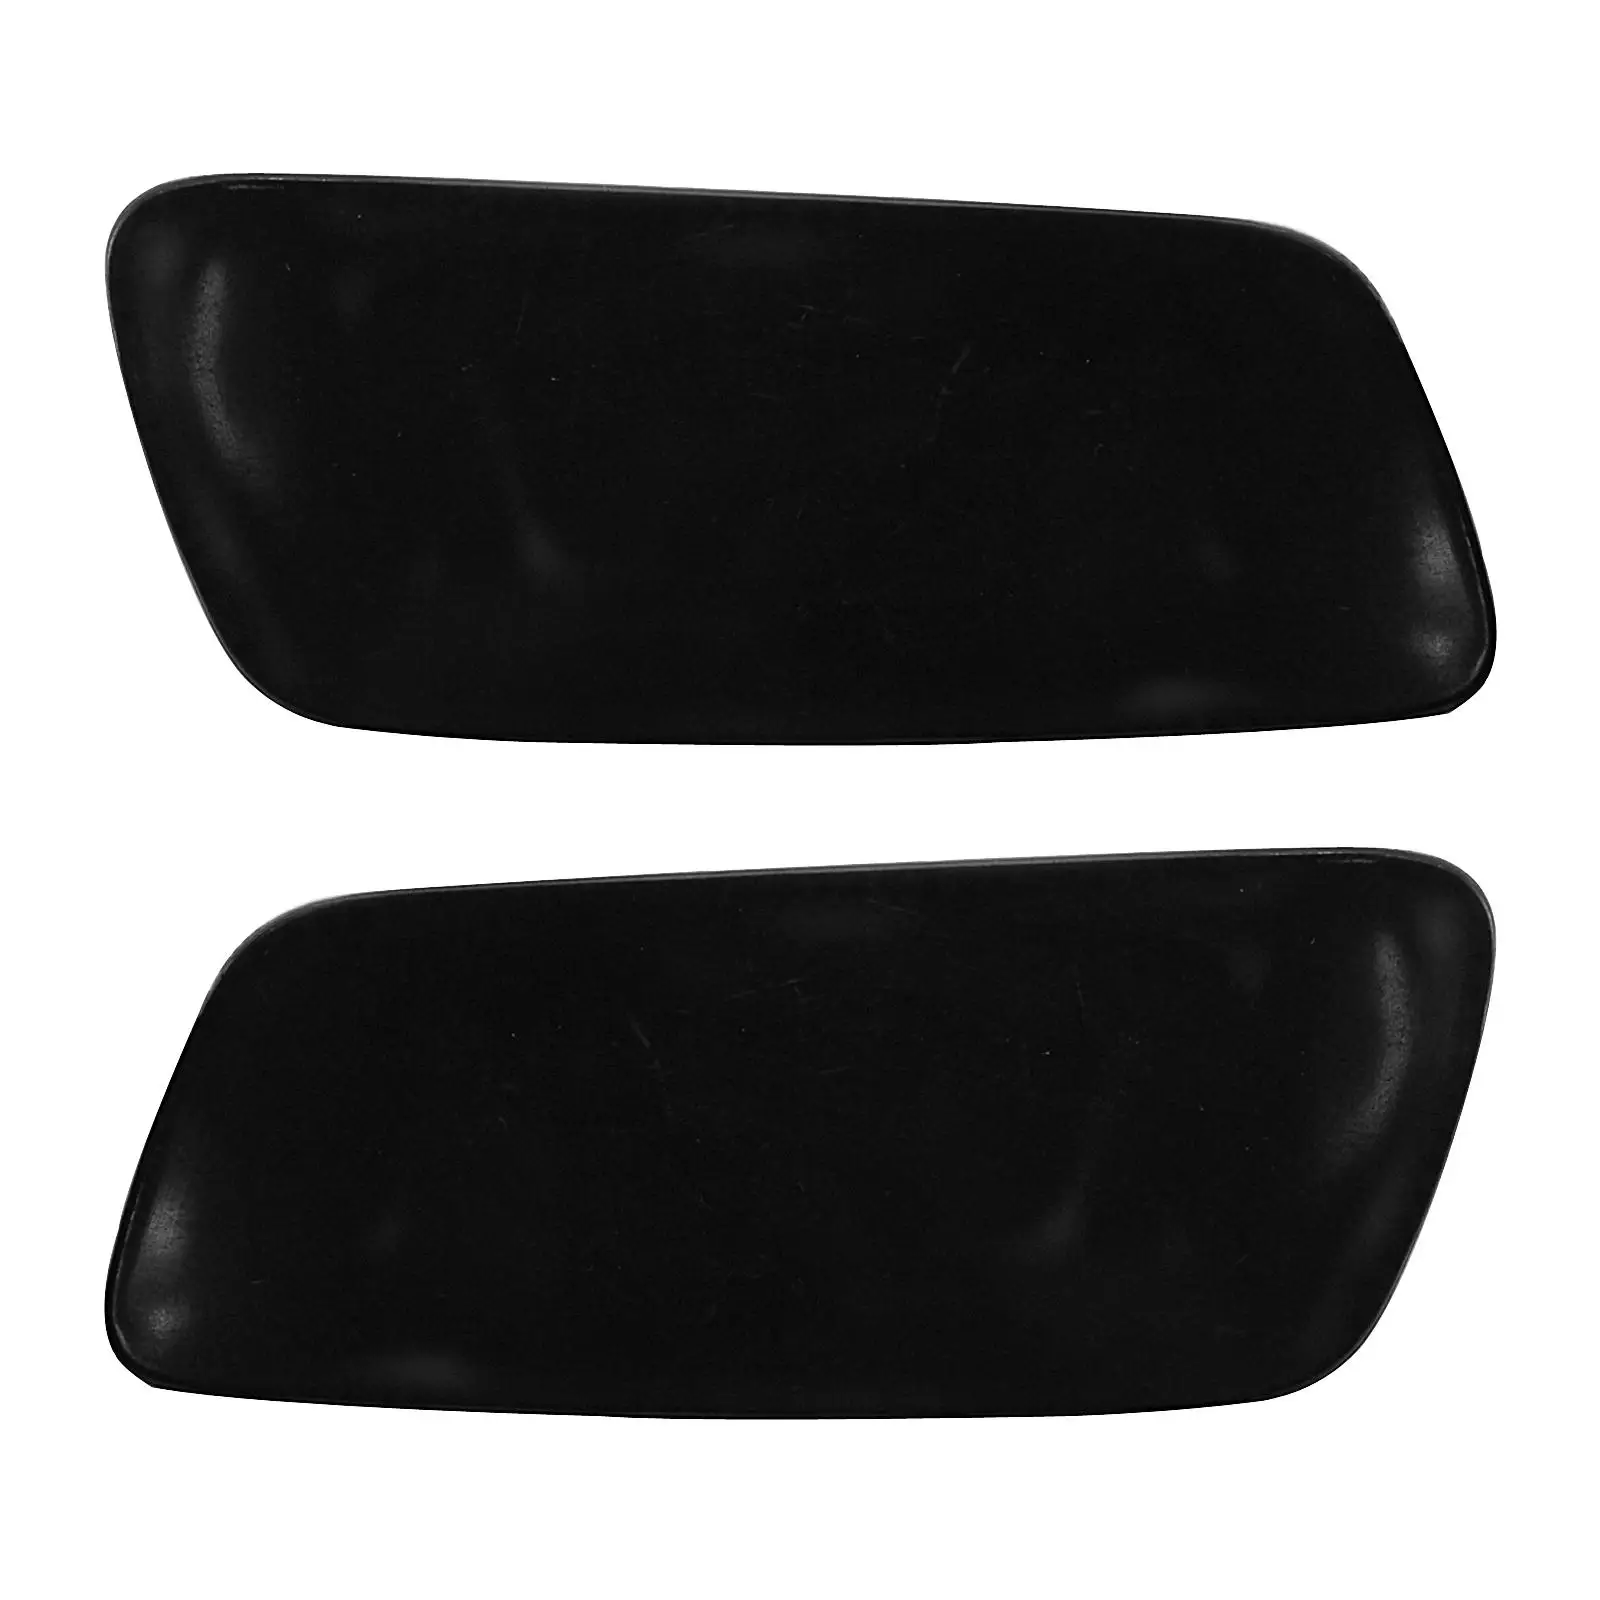 2x 39839842 398398305 Accessories Car Parts 398398420 Exterior Parts Replacement Front Headlight Washer  Fit for 